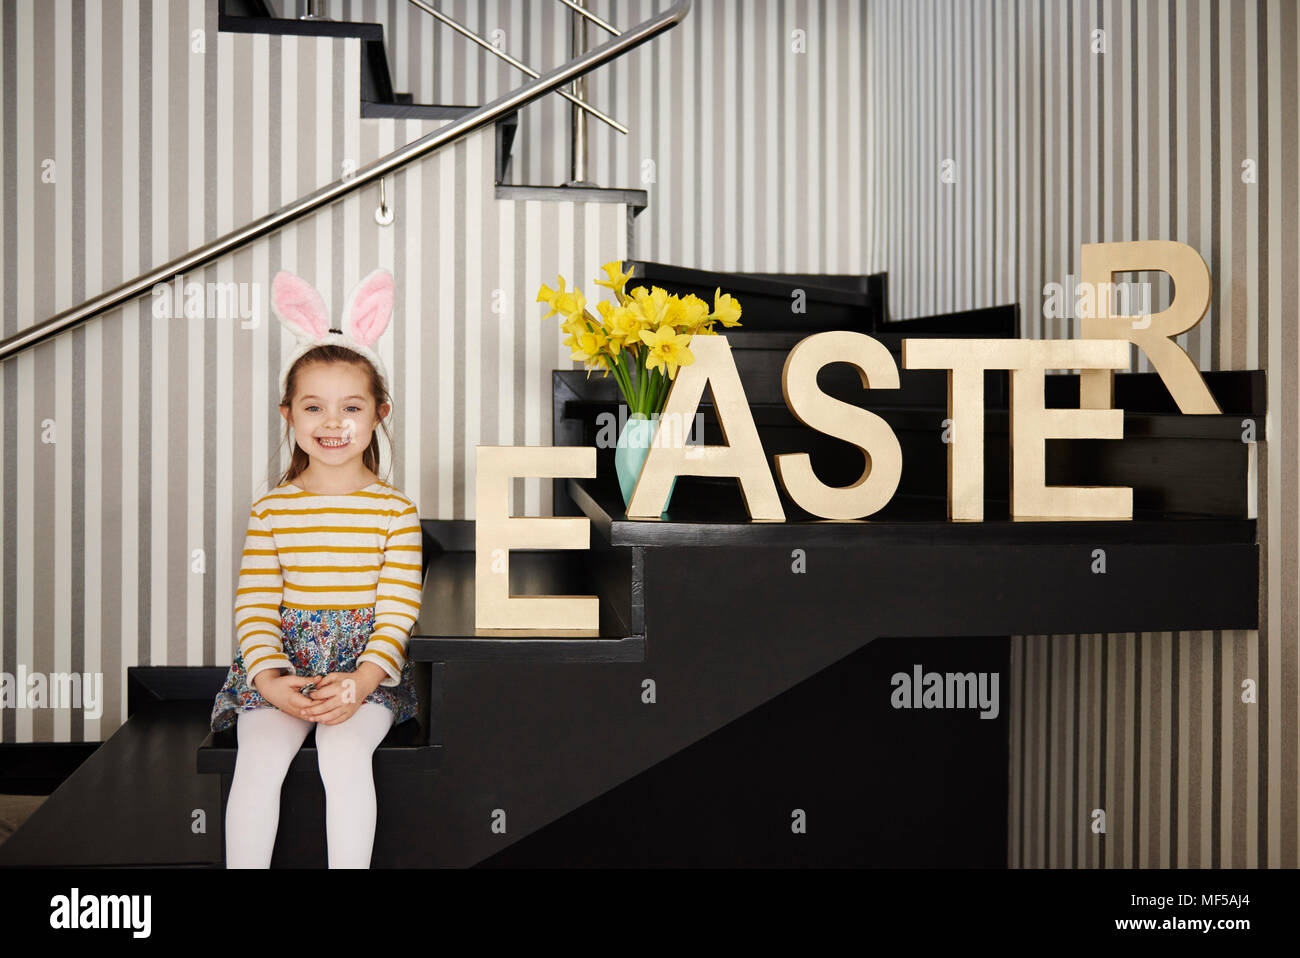 Portrait of smiling girl with bunny ears sitting on stairs next to word 'Easter' Stock Photo